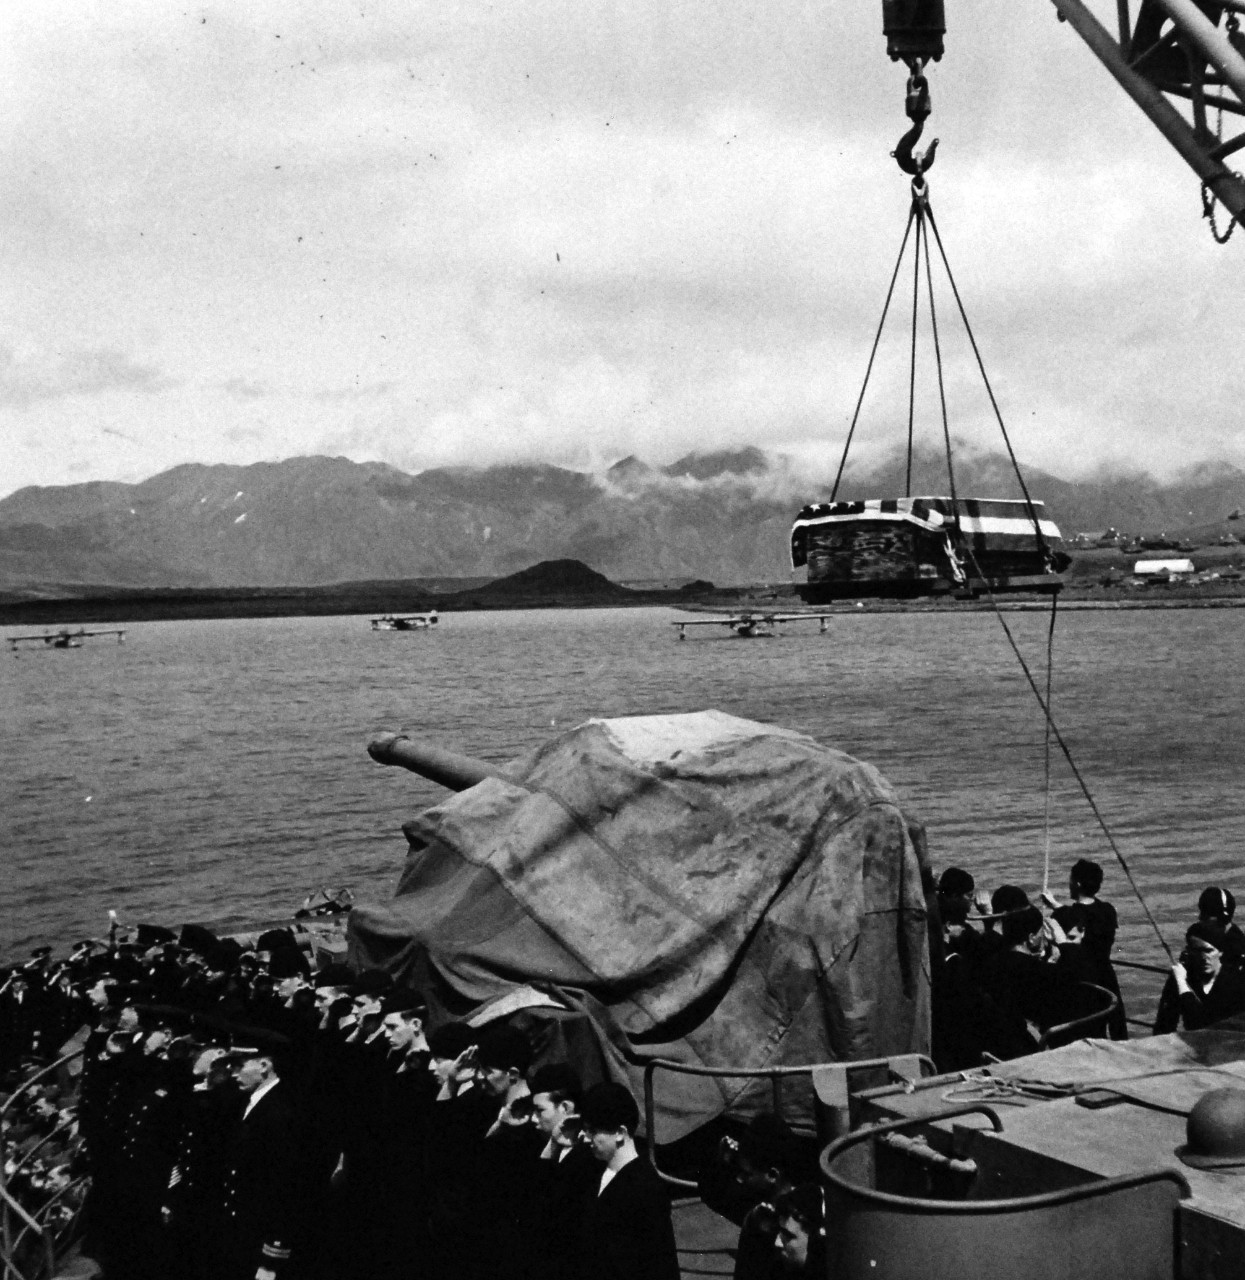 80-G-475656:  Aleutian Islands Campaign, June 1942 - August 1943.  Battle of Attu, May 11-29, 1943.  While shipmates salute, flag covered casket of U.S. sailor is lowered into small boat from USS Casco (AVP-12) to be taken to Attu for burial.  Photographed released by the Steichen Photographic Unit:  Lieutenant Commander Horace Bristol, July 1943.  TR-5347.   U.S. Navy photograph, now in the collections of the National Archives.  (2015/11/17).